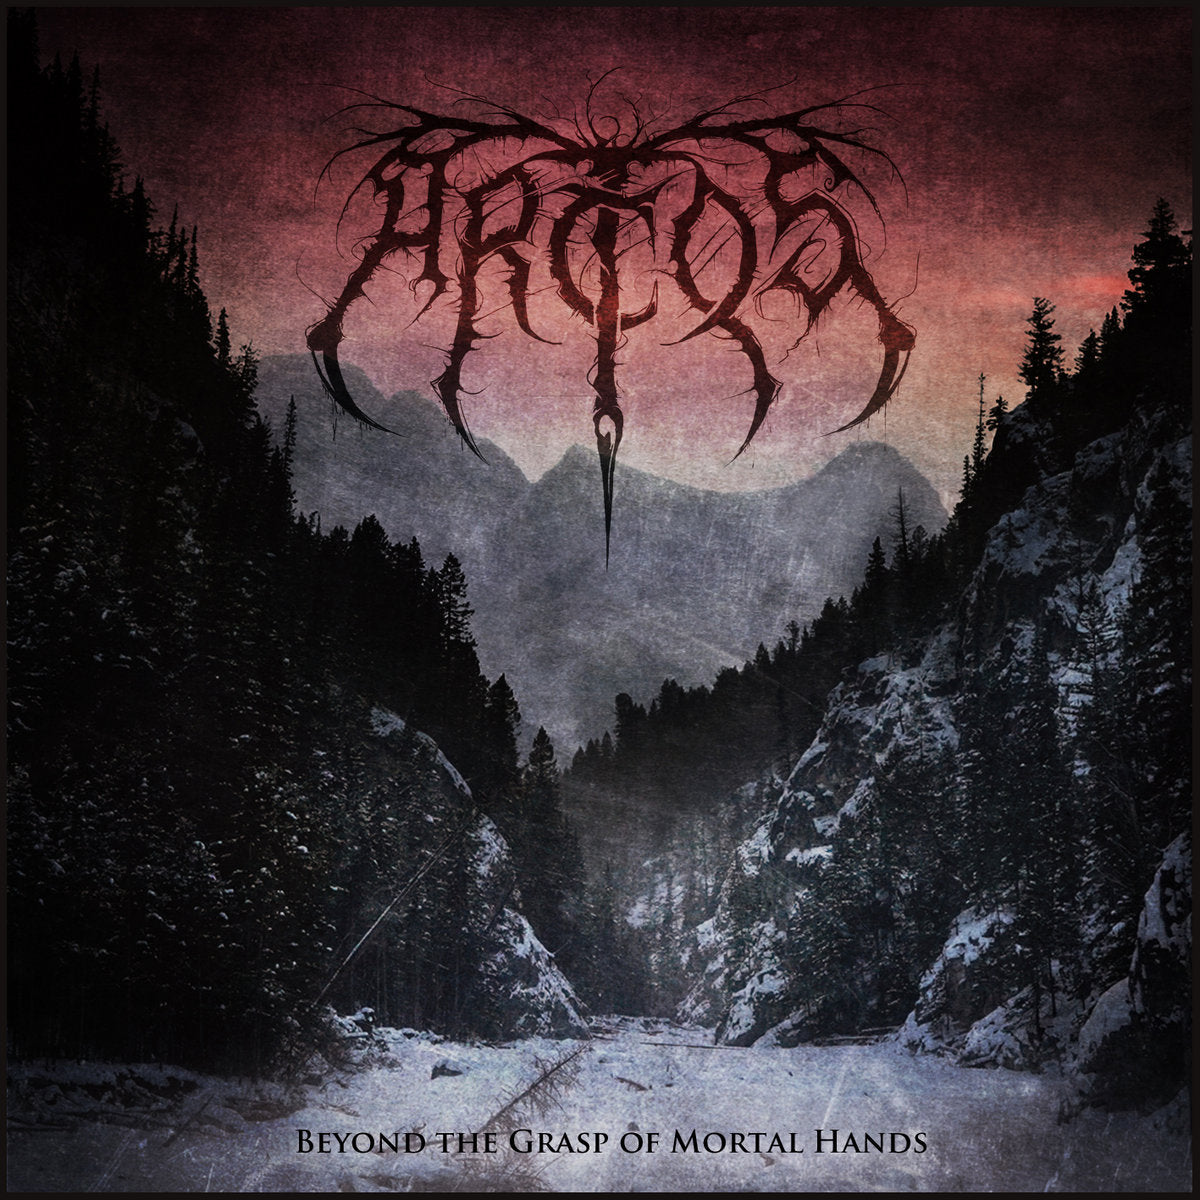 [SOLD OUT] ARCTOS "Beyond the Grasp of Mortal Hands" CD